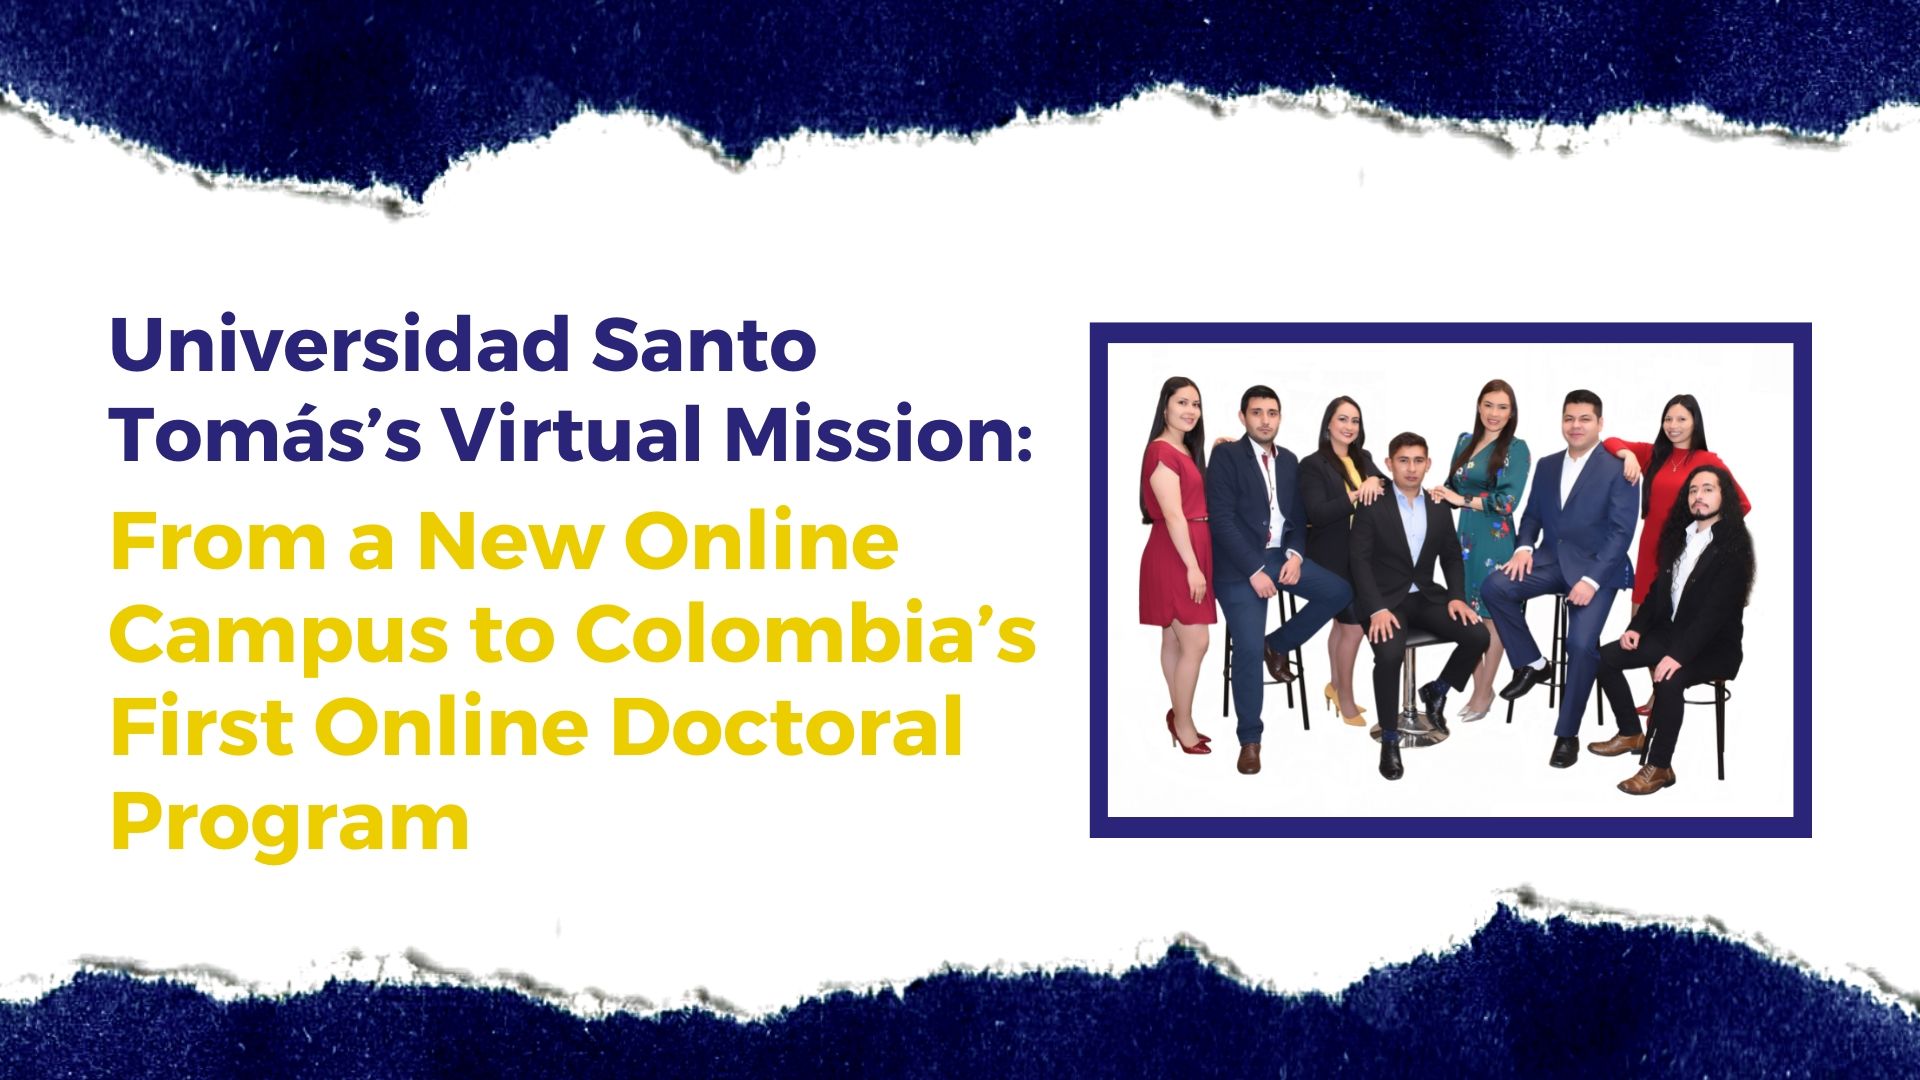 Universidad Santo Tomás’s Virtual Mission: From a New Online Campus to Colombia’s First Online Doctoral Program 